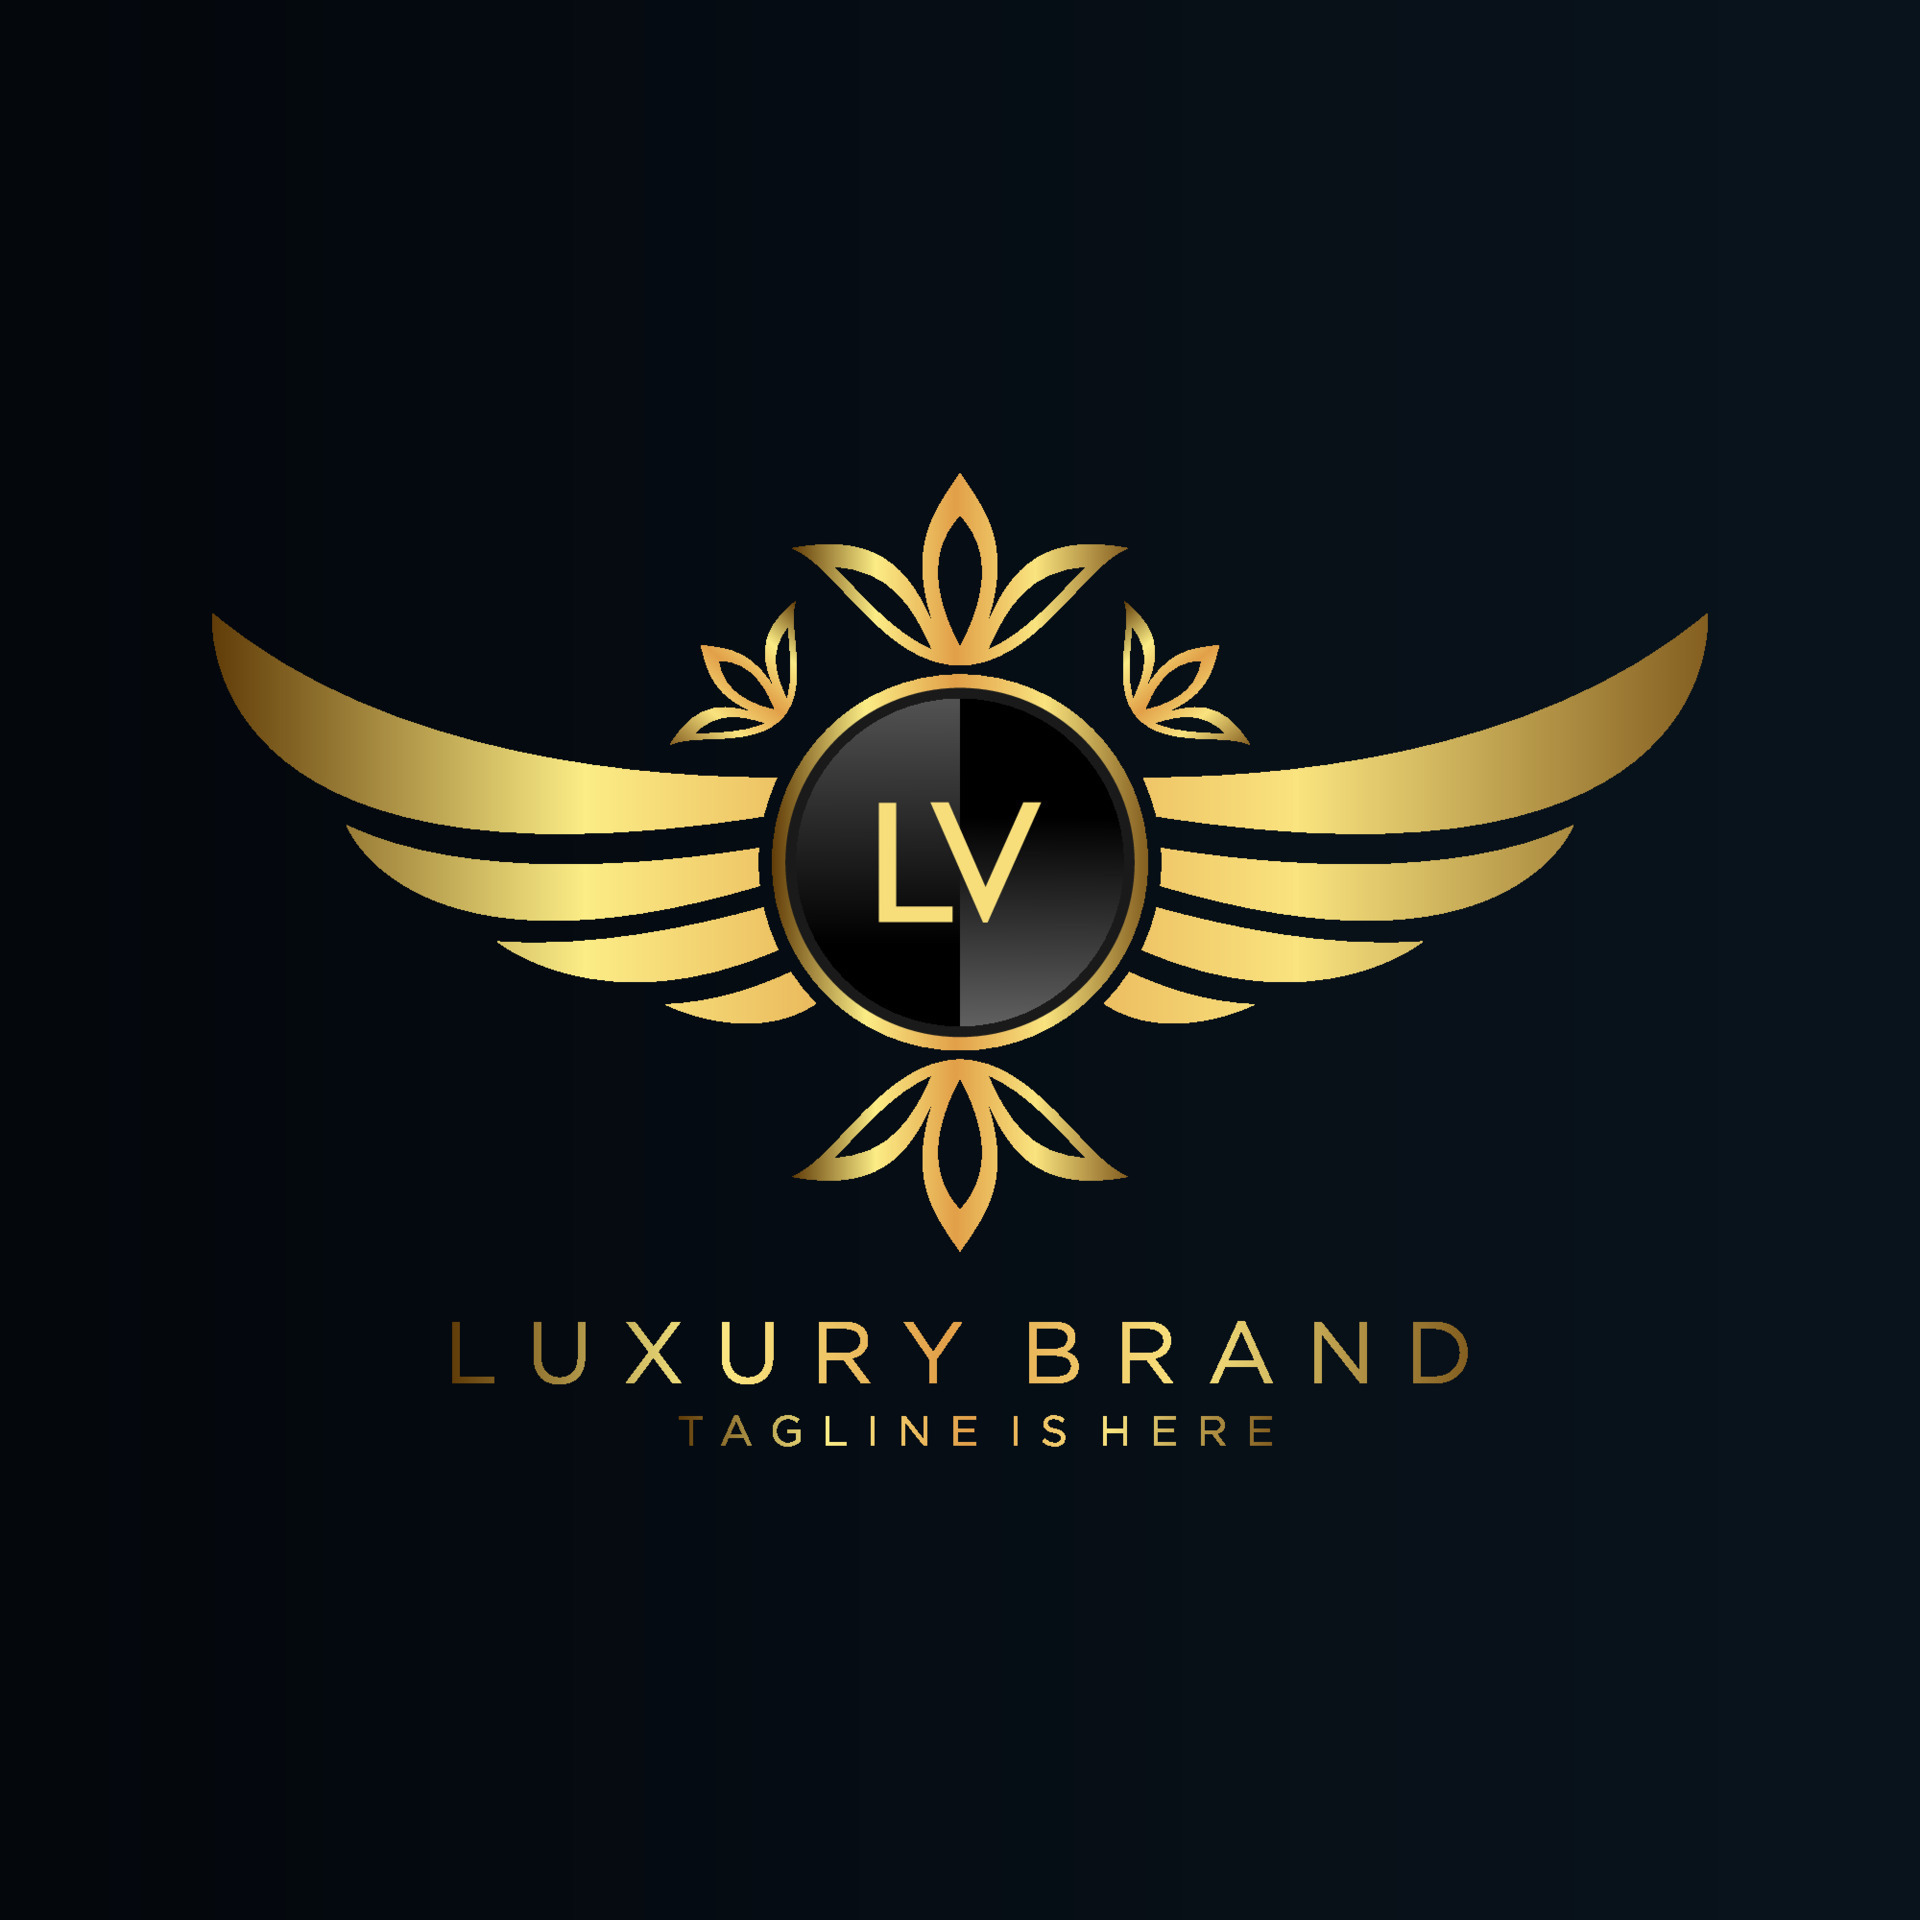 LV Letter Initial with Royal Template.elegant with crown logo